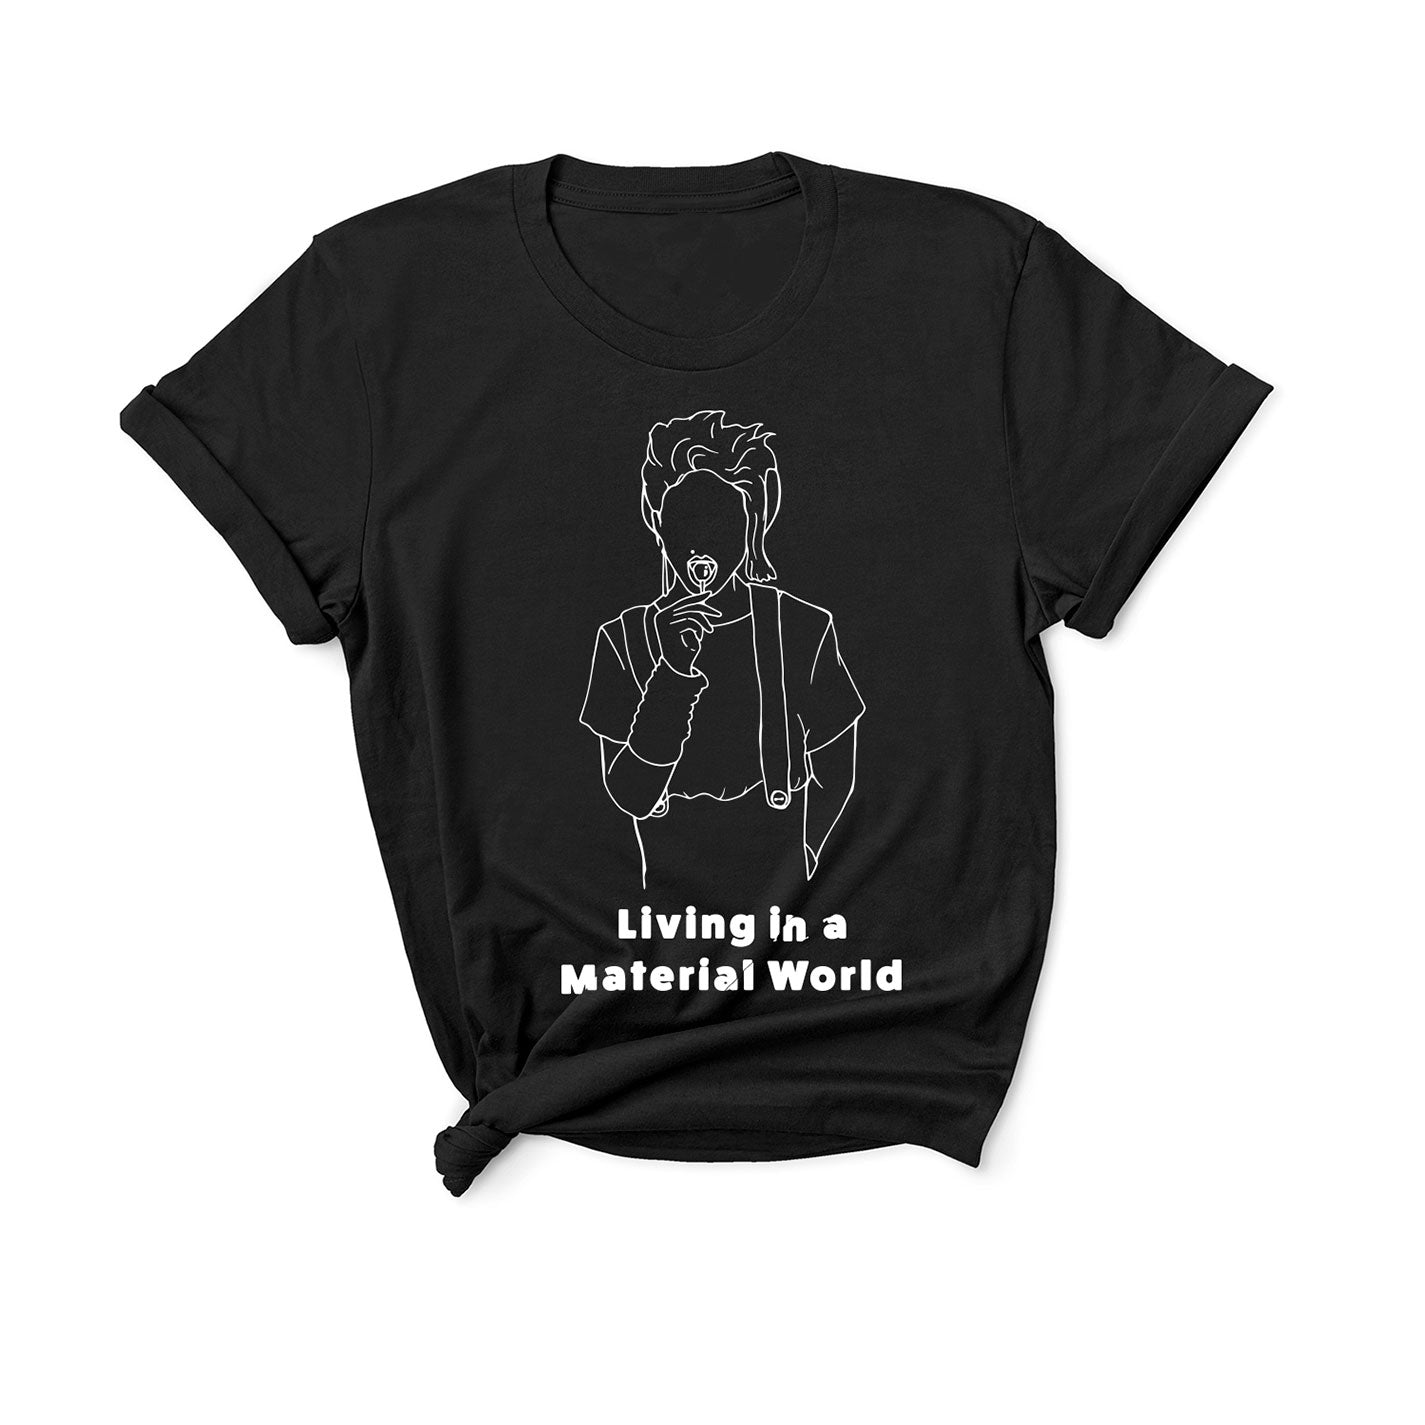 Living In a Material World - Unisex T-Shirt